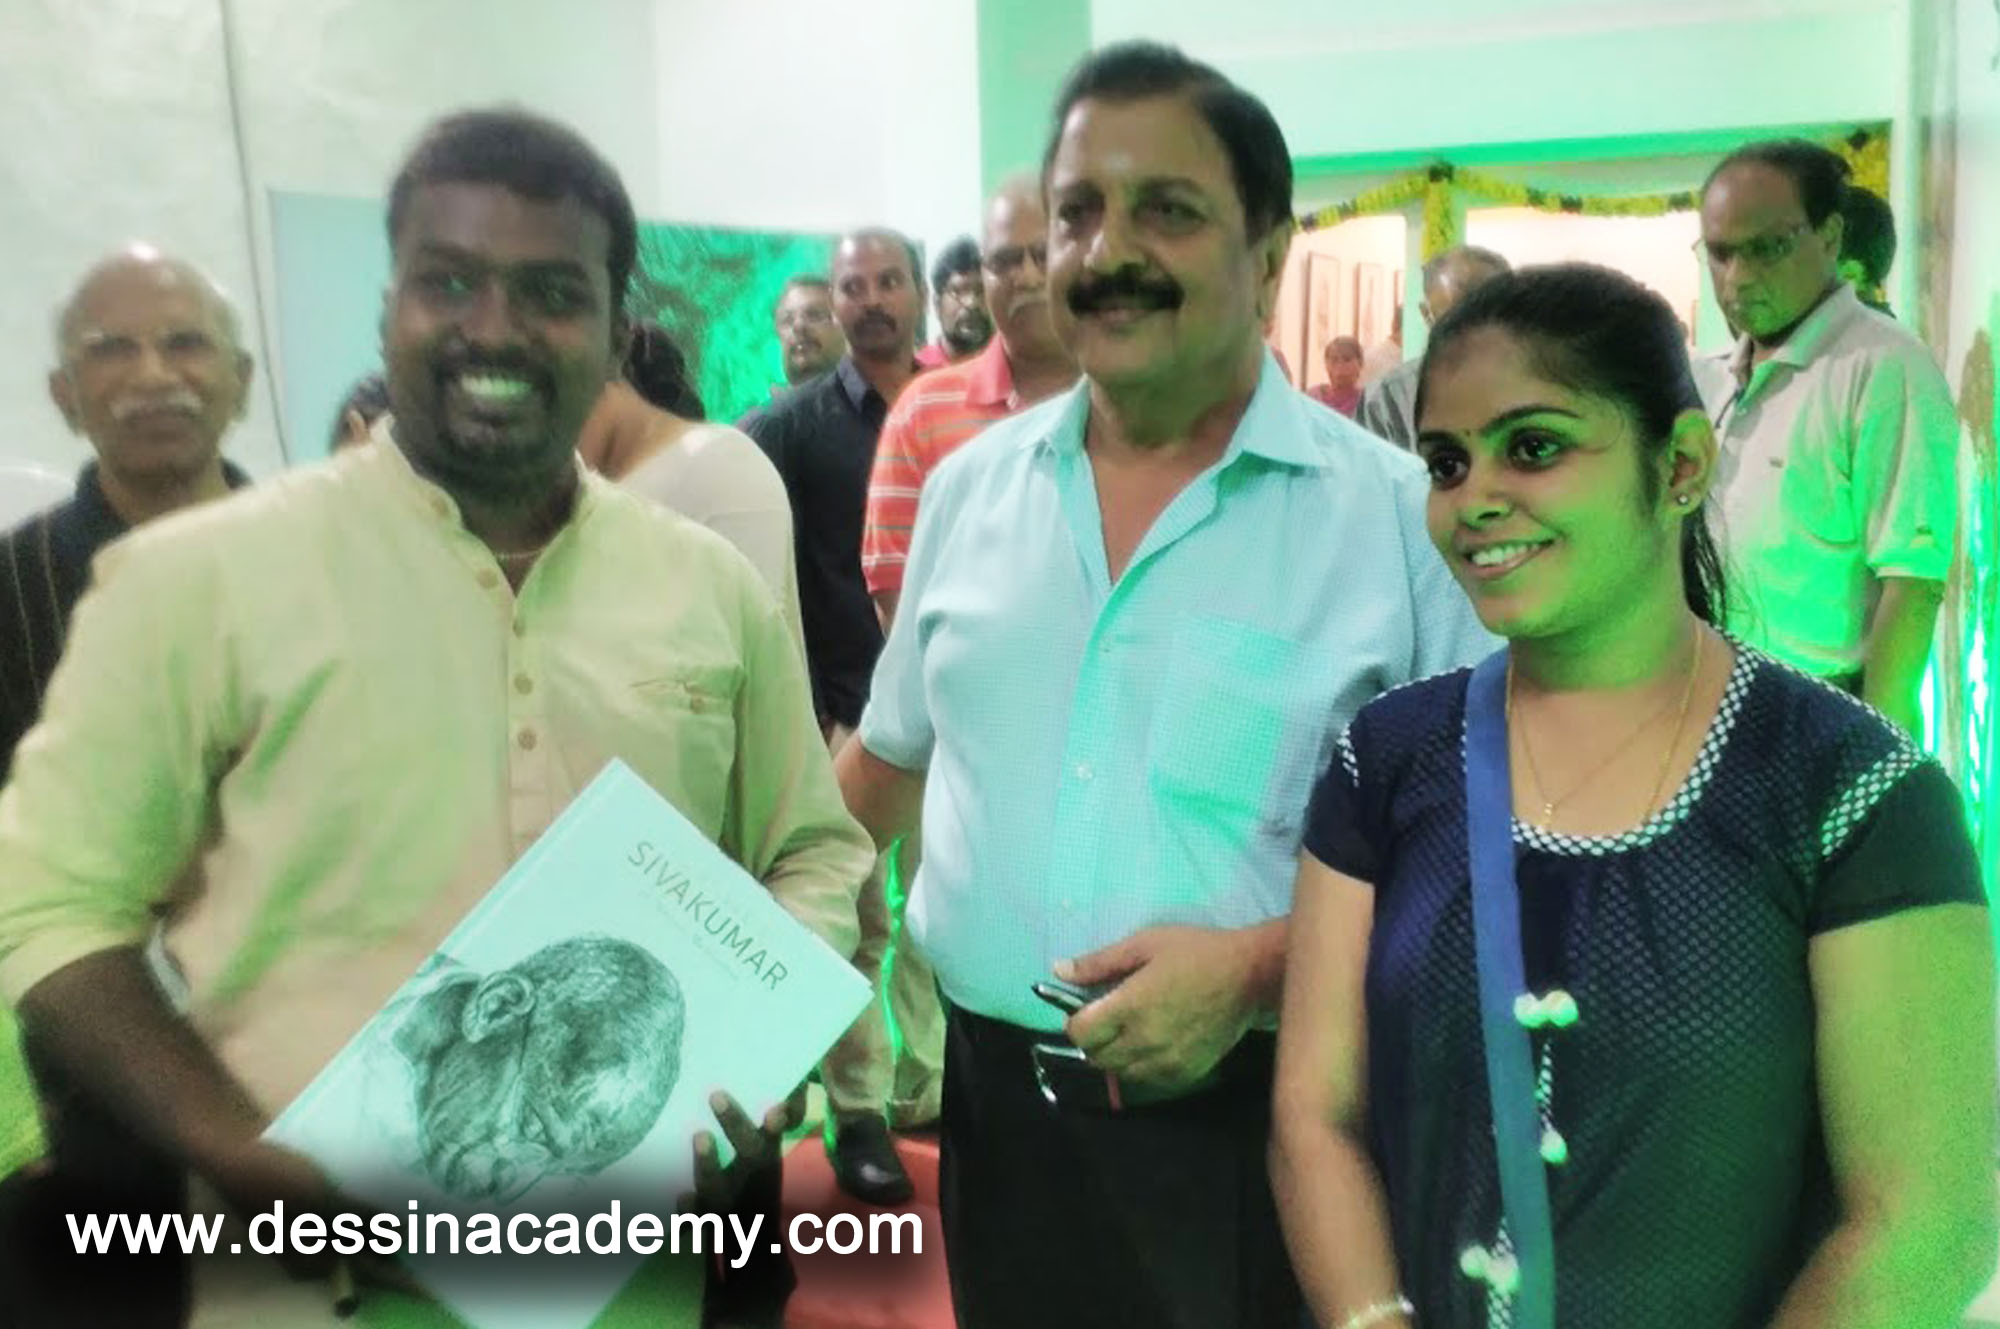 Dessin School of arts Event Gallery 4, Painting Institute in ChennaiDessin School of Arts